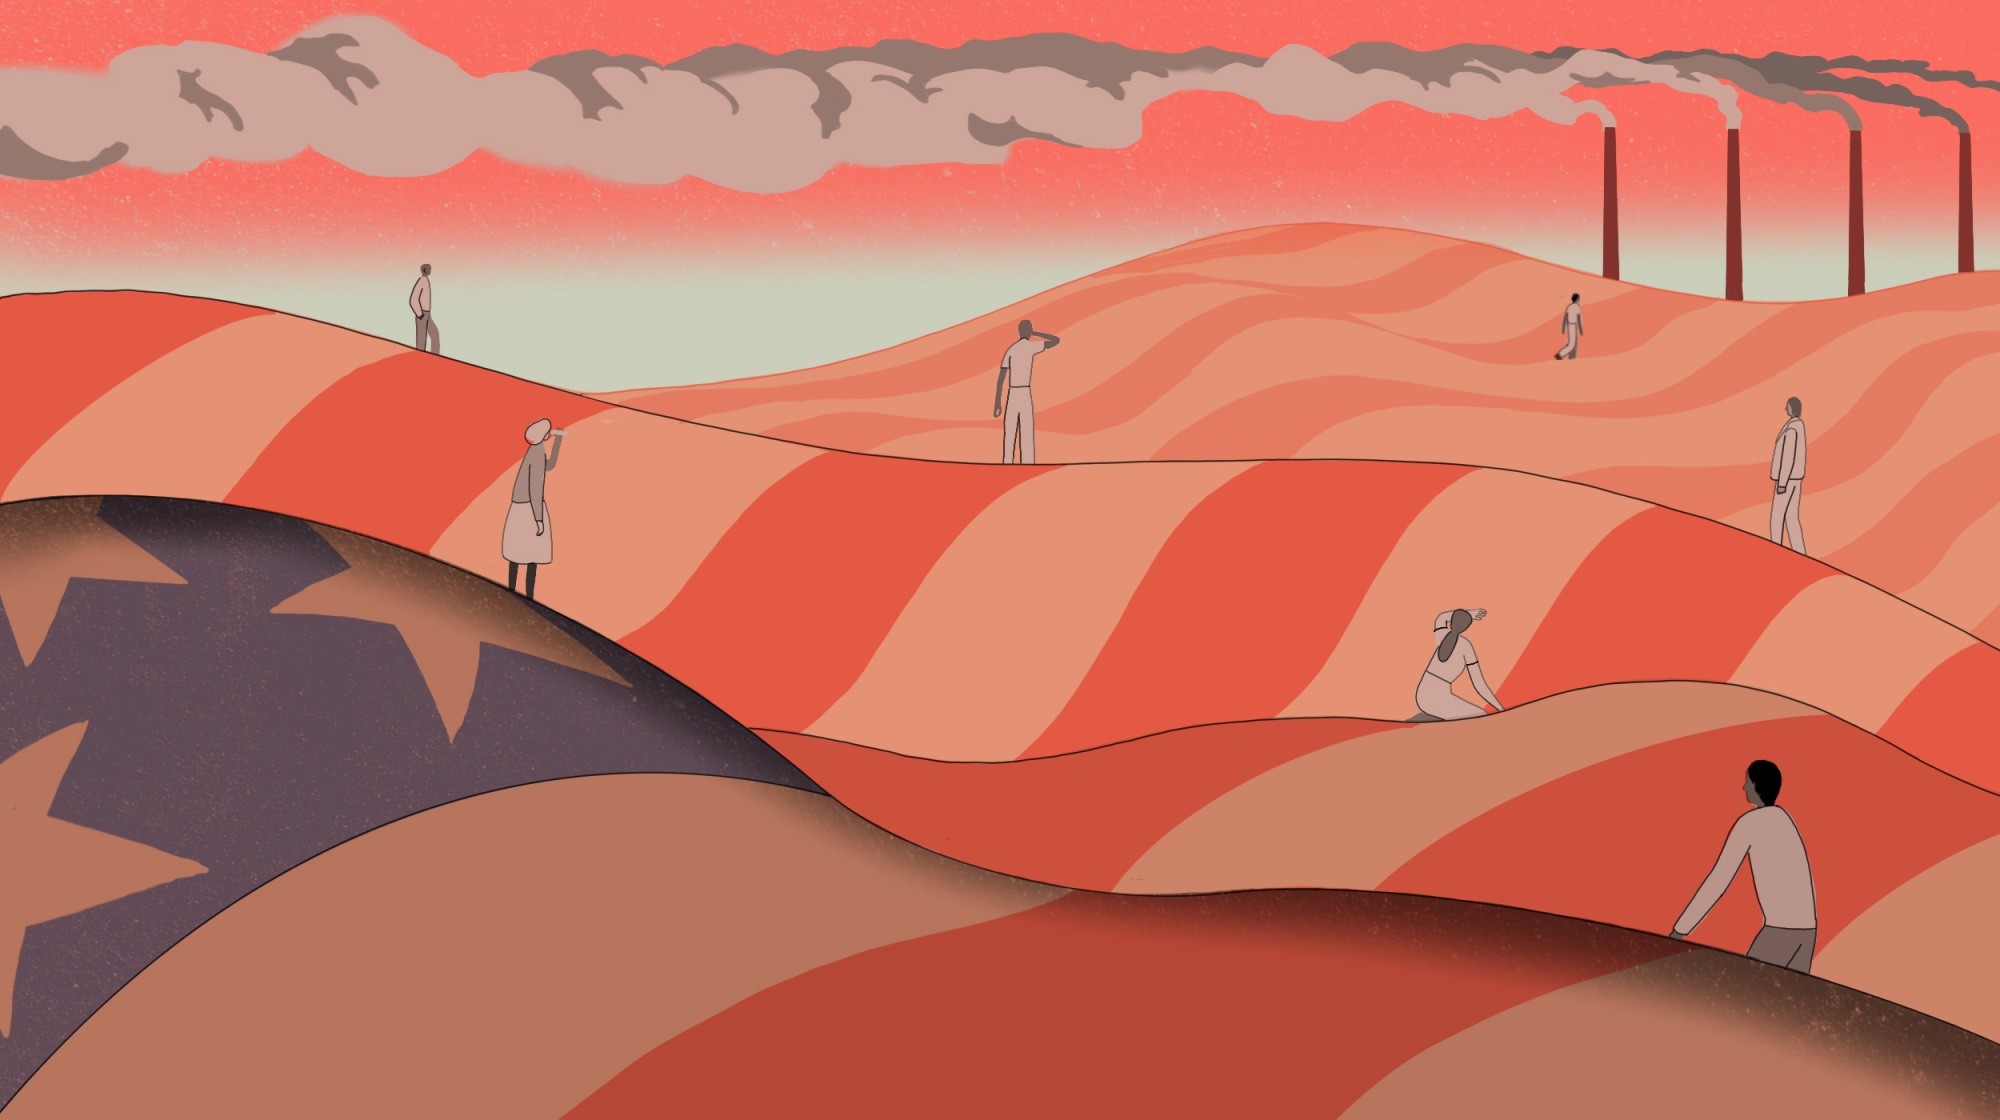 Illustration of overheated people standing on hills made of the American flag, smoke stacks billow in the distance.